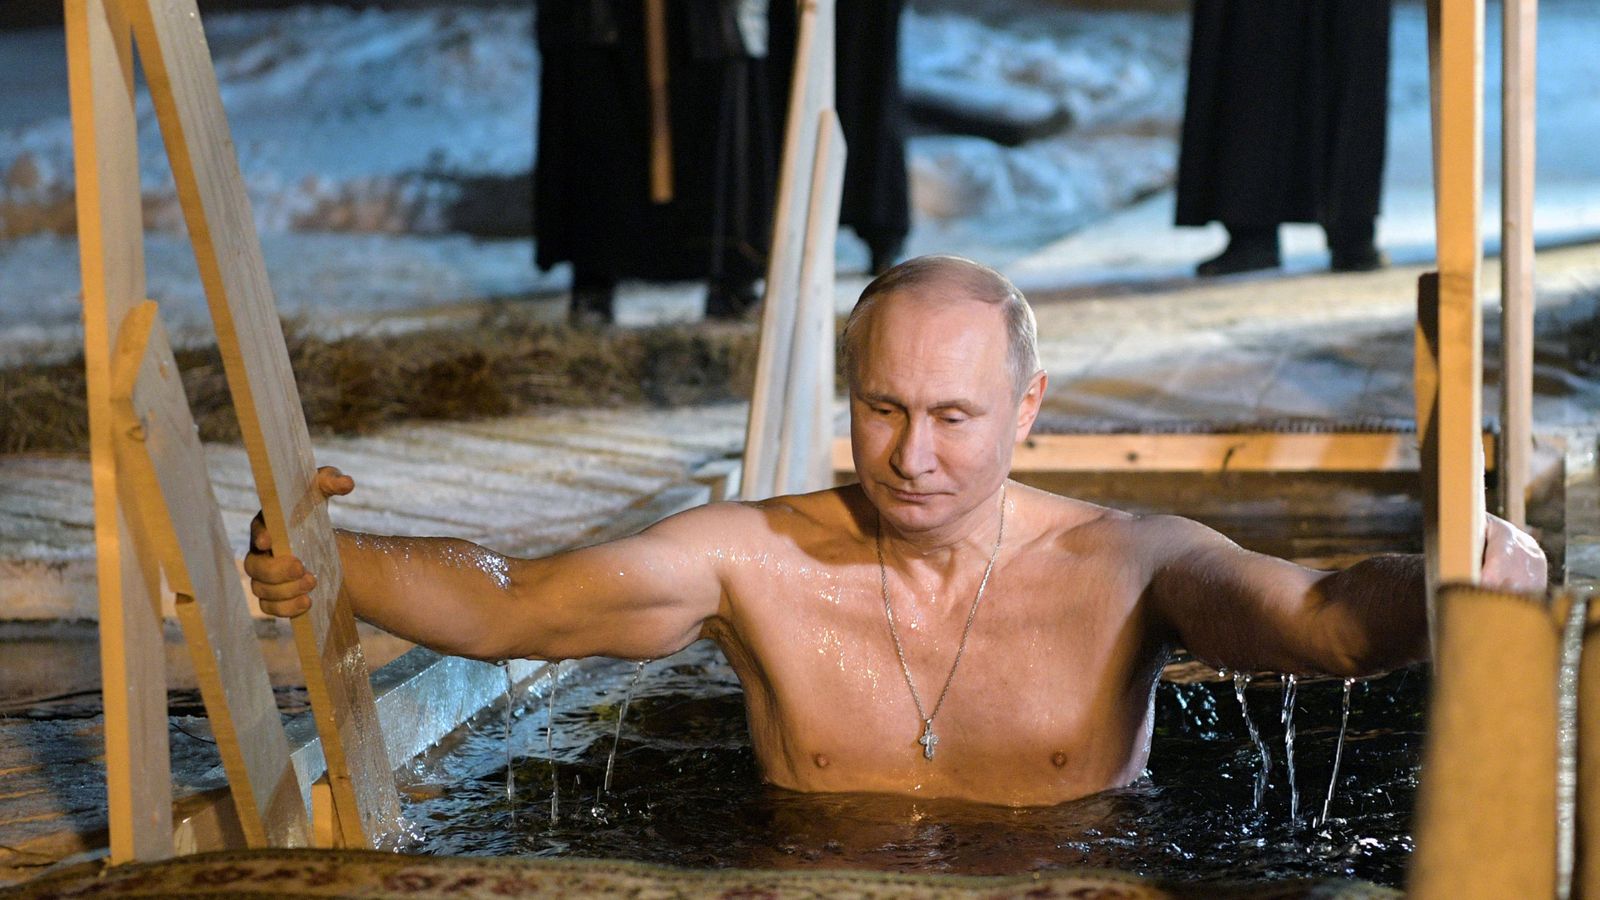 Bare Chested Vladimir Putin Plunges Into Icy Lake In Latest Macho Photo Op